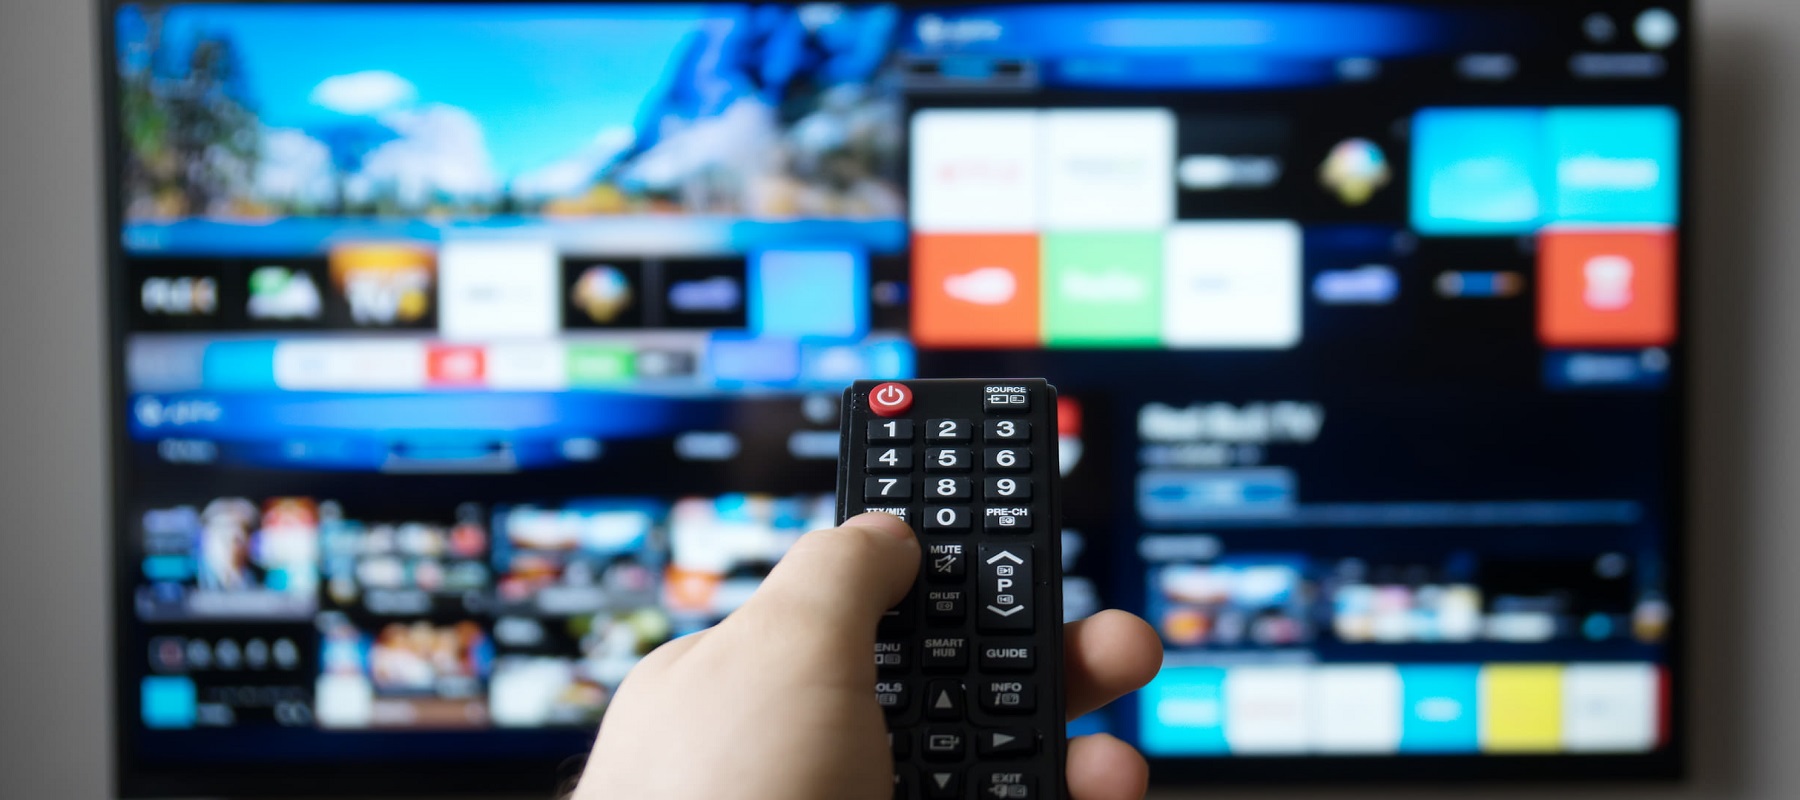 Streaming takes center stage in Germany as traditional TV viewership declines, study